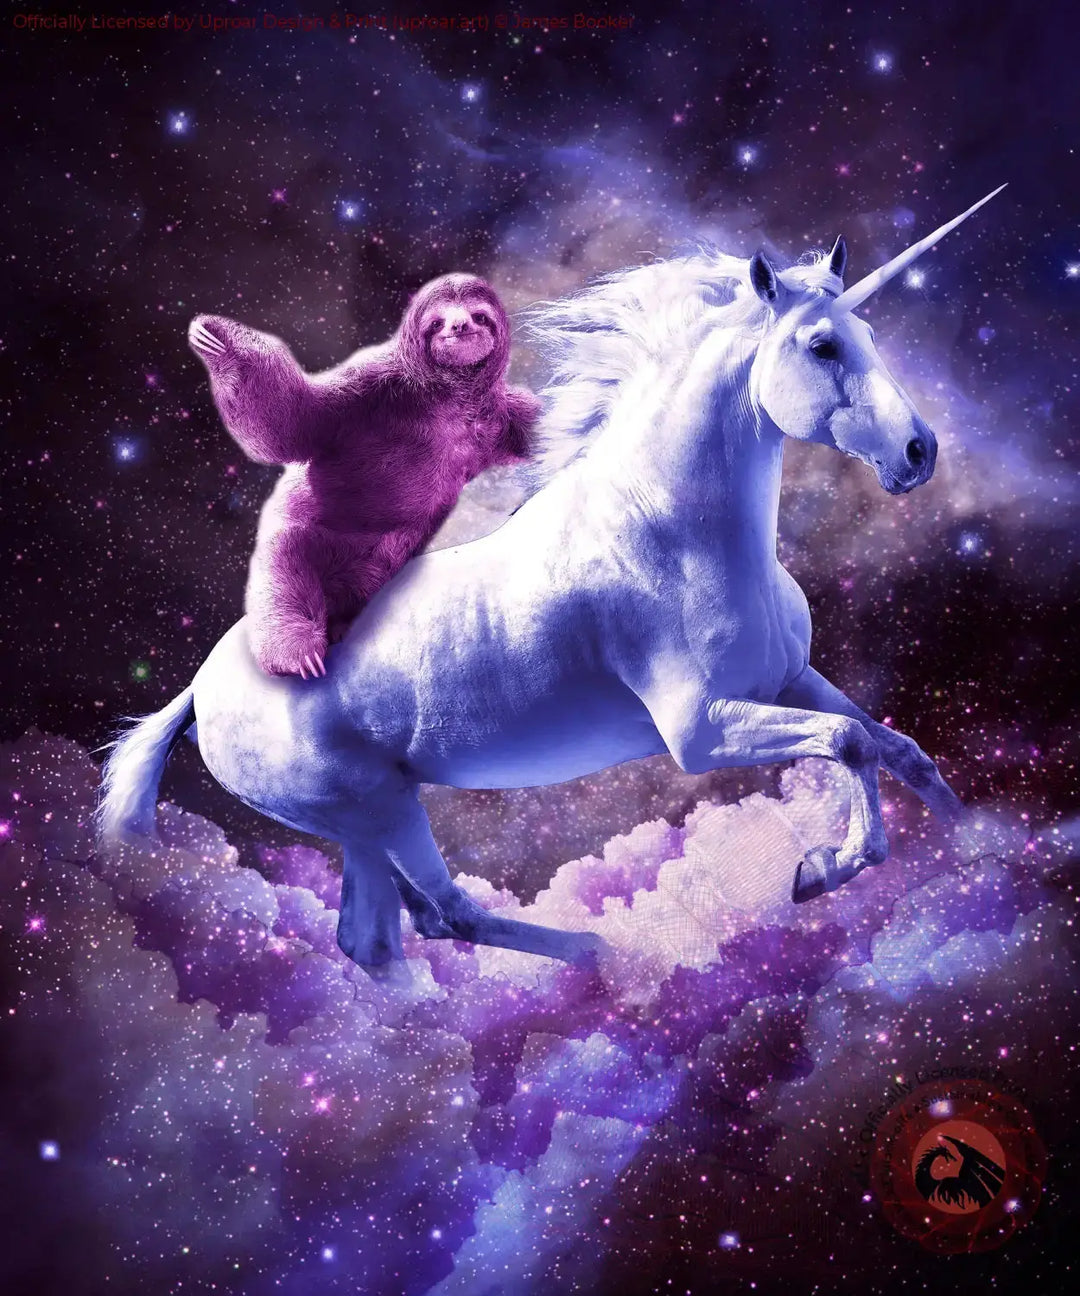 Space Sloth Riding On Unicorn James Booker